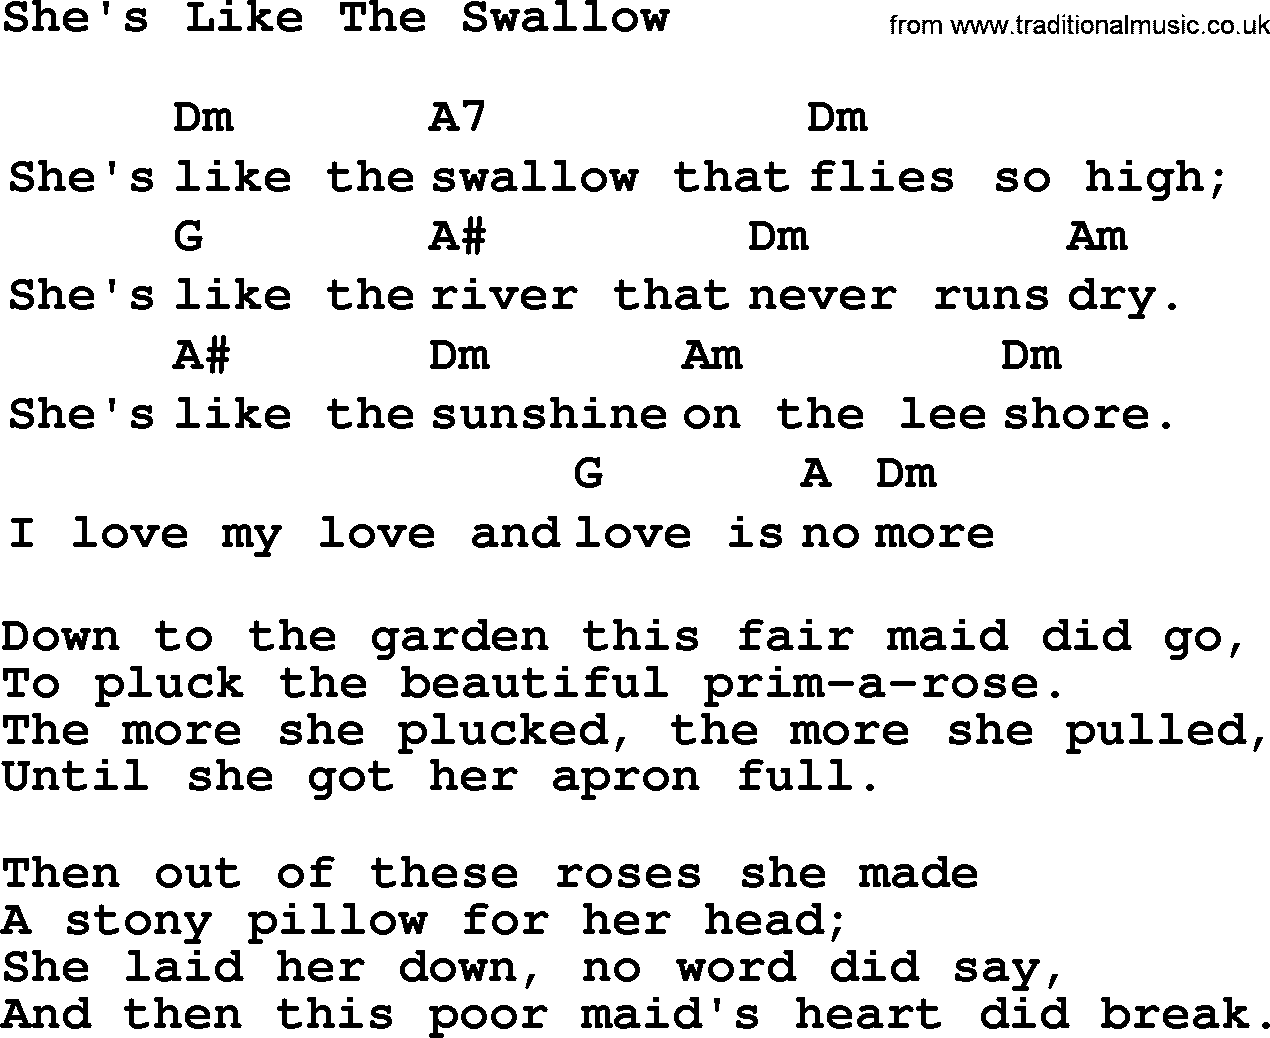 Top 1000 Most Popular Folk and Old-time Songs: Shes Like The Swallow, lyrics and chords